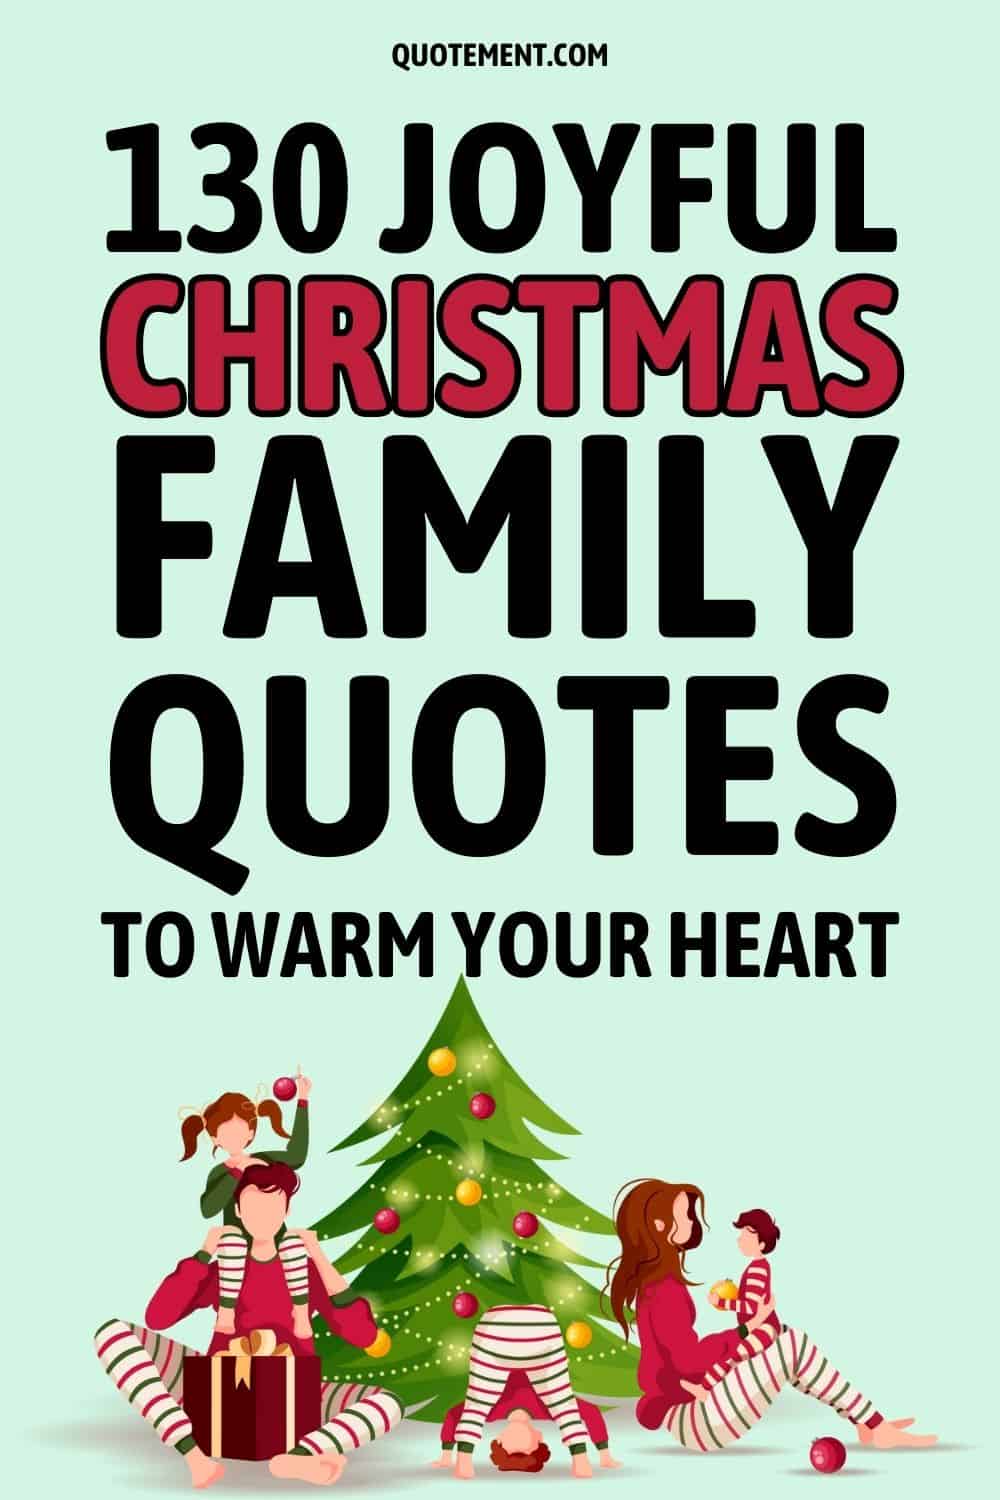 130 Joyful Christmas Family Quotes To Warm Your Heart